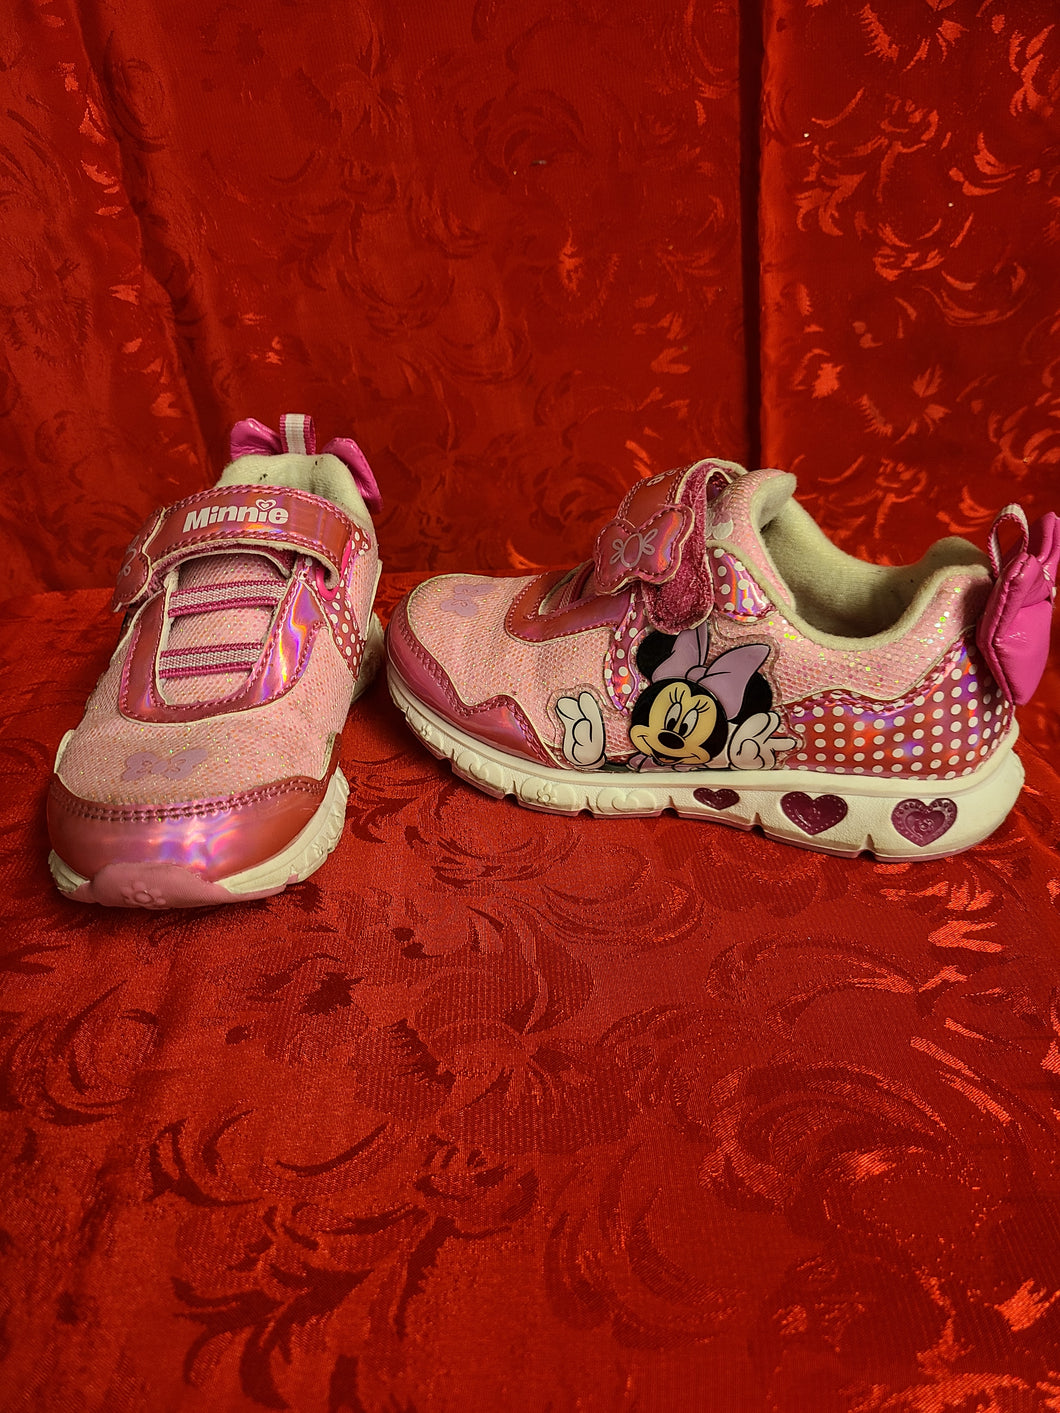 Disney Junior Minnie Mouse Girl's Size 10 Shoes Unicorn Pink sneakers excellent